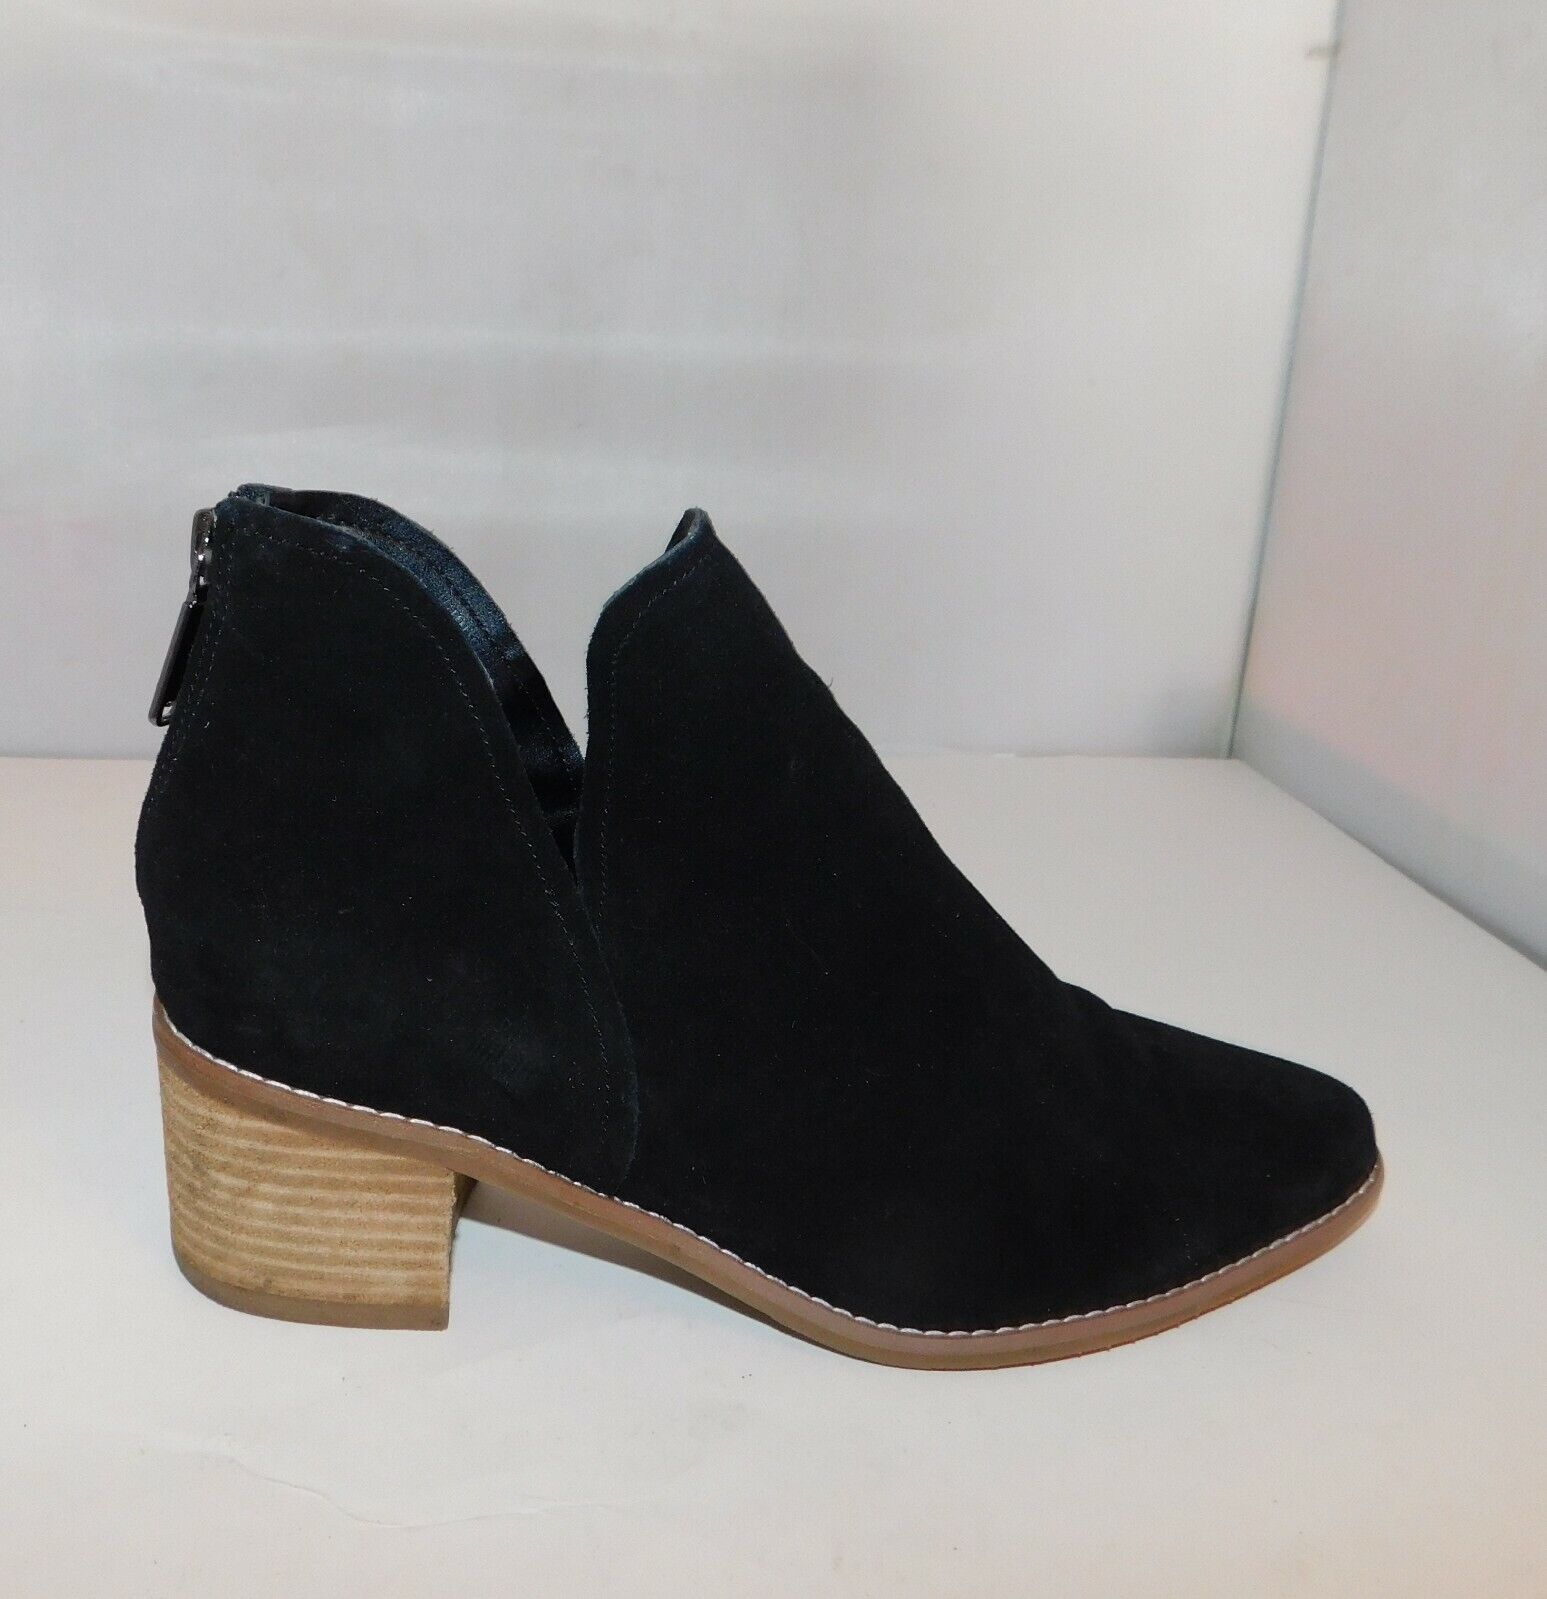 Primary image for BLONDO Ellis Waterproof Black Suede Ankle Boots 9.5 M